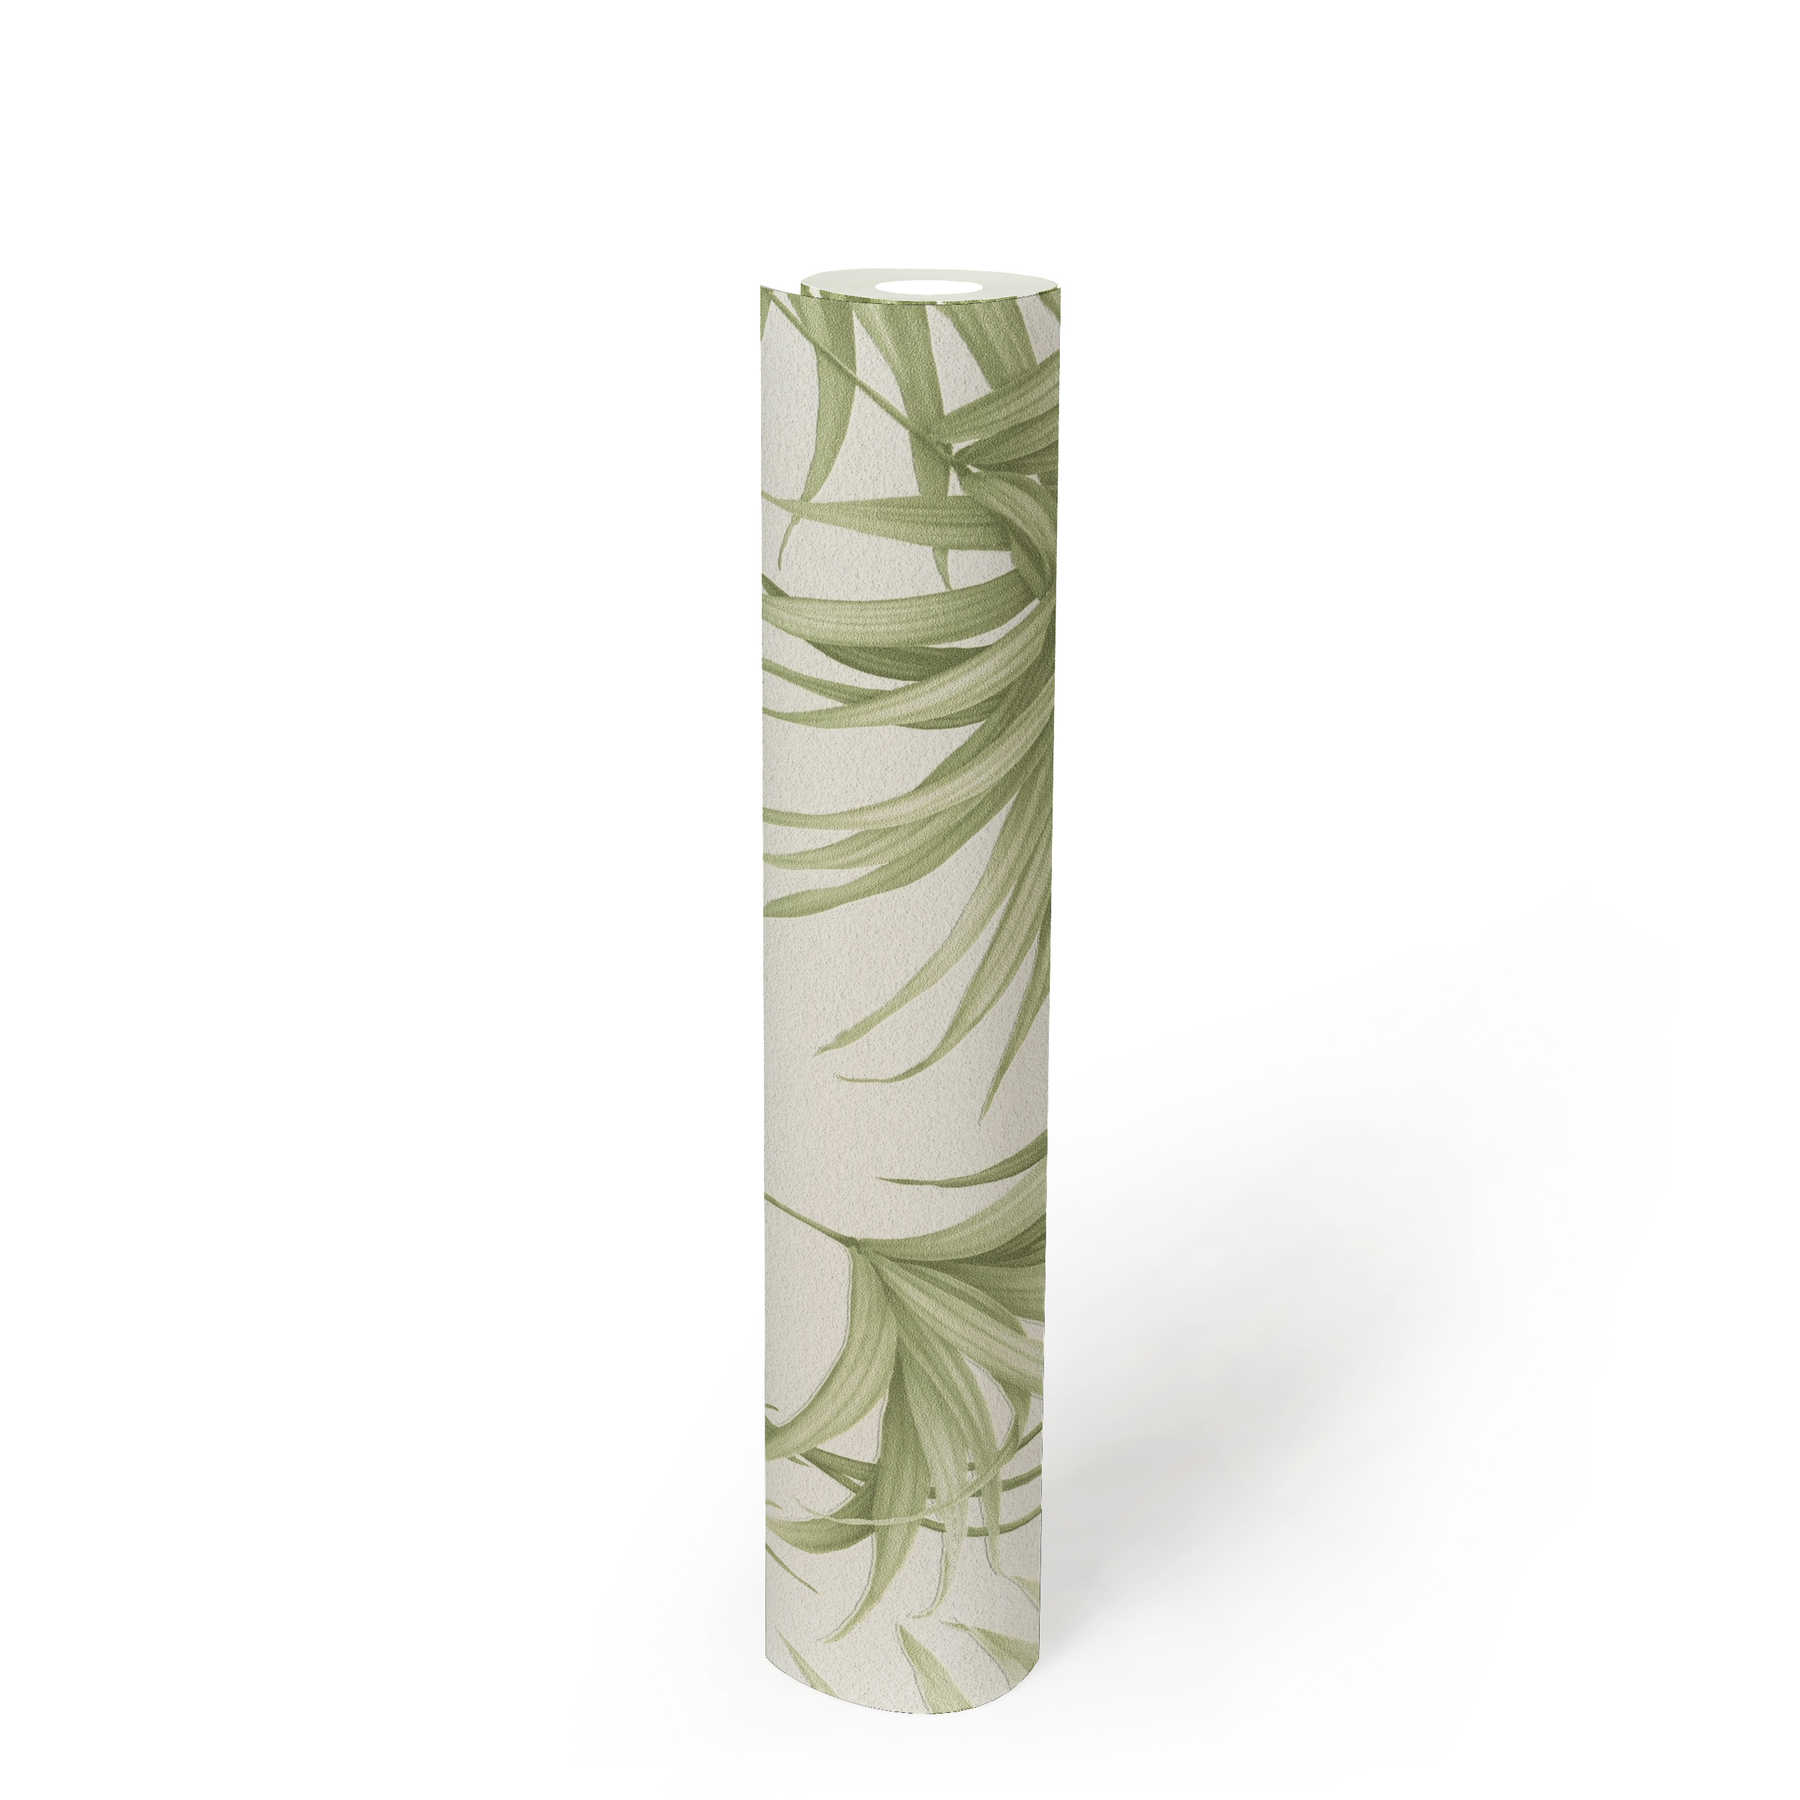             Leaves wallpaper with exotic fern leaves - green, white
        